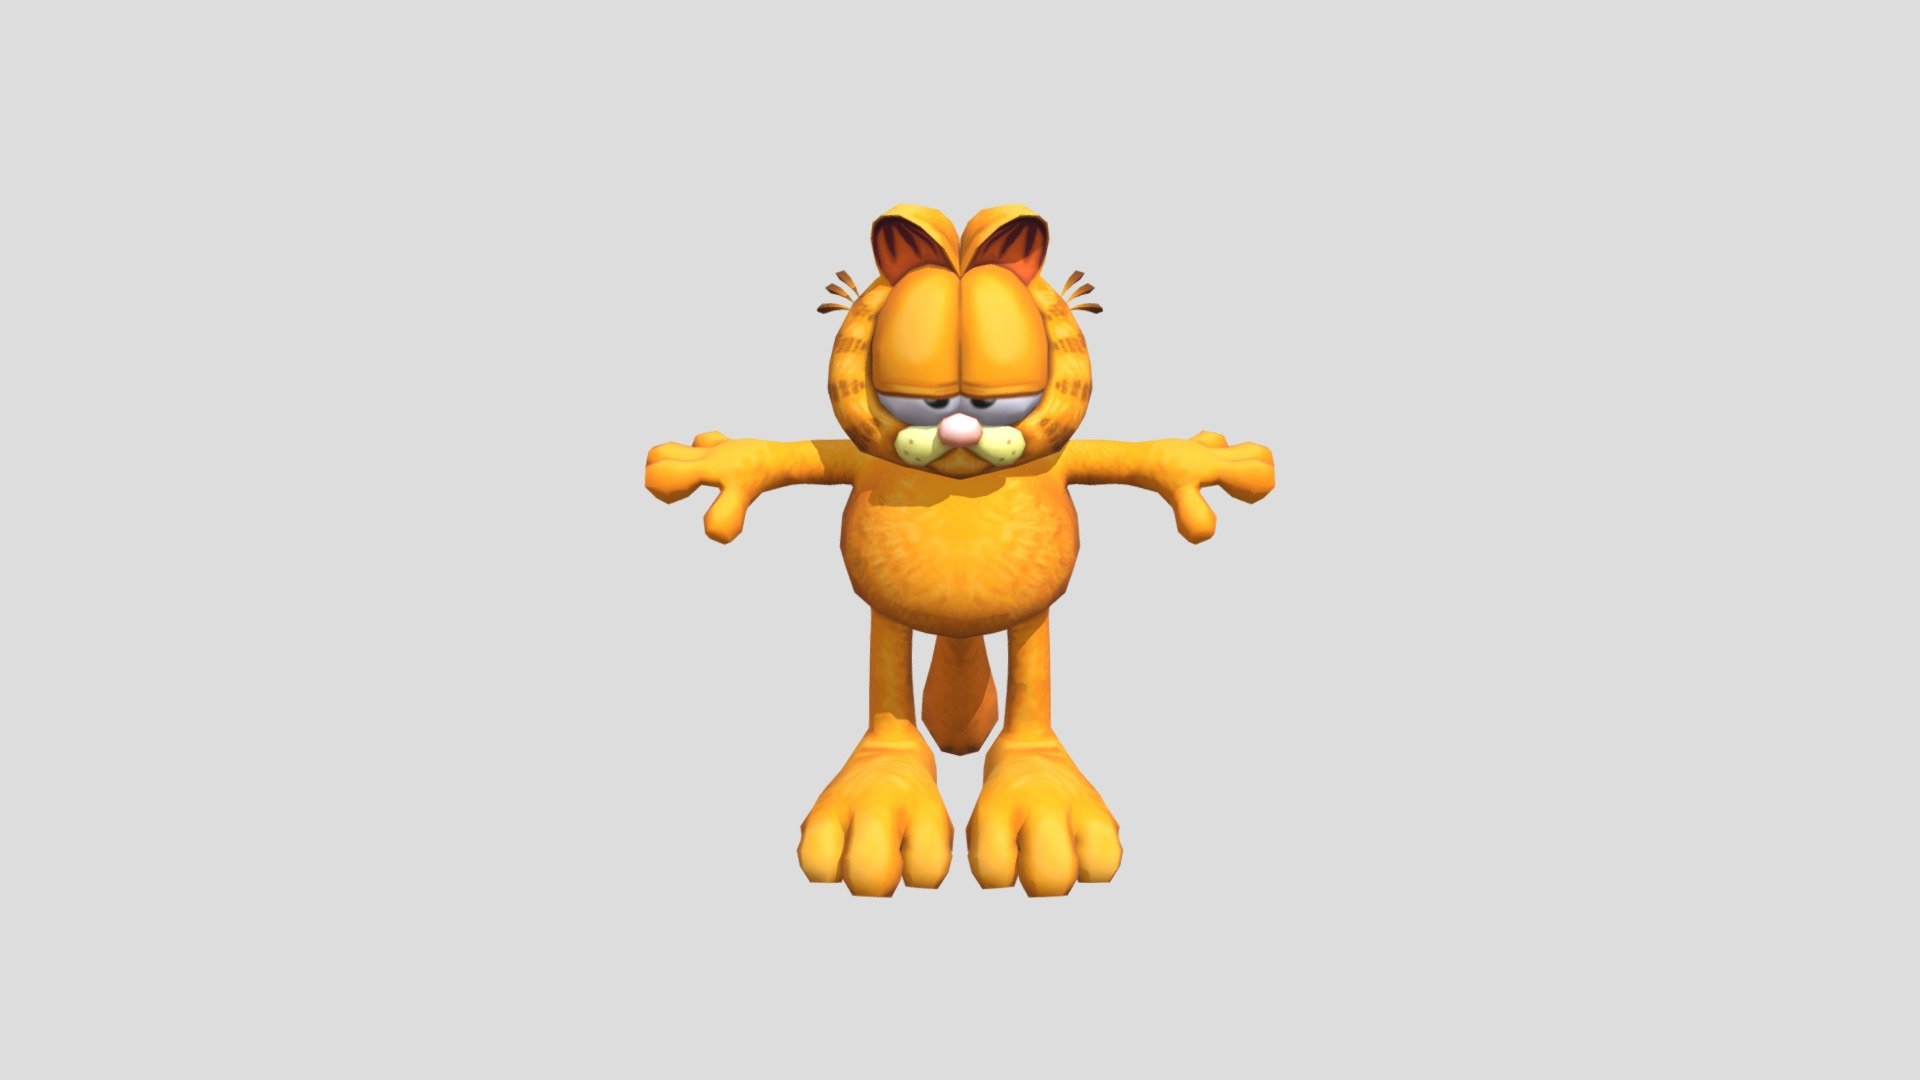 Garfield Lasagna World Tour (With Commentary) (Part 4) 